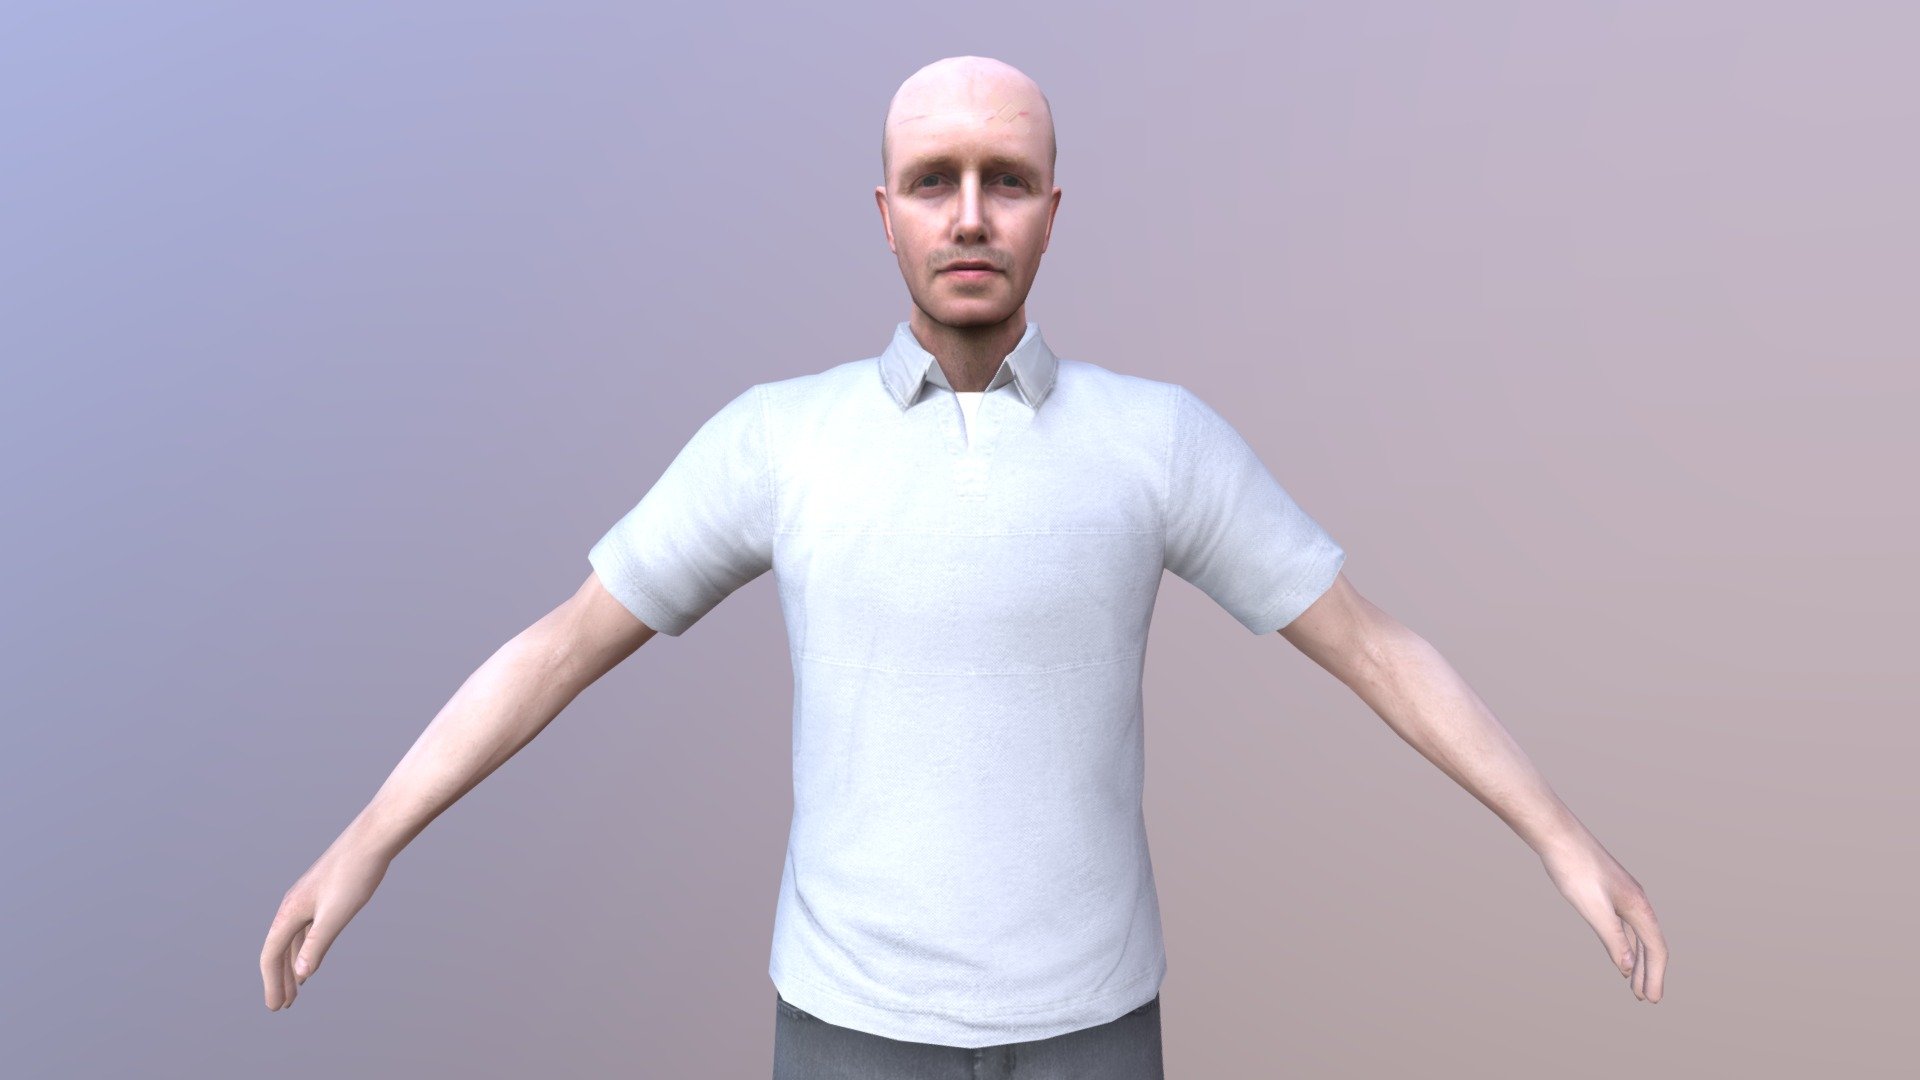 HUMAN CHARACTER WITH 250 ANIMATIONS

PLEASE VISIT MY PROFILE FOR VIEW AND DOWNLOAD MORE LOW POLY AND REALISTIC HIGH POLY CHARACTERS

*AVAILABLE FILE FORMATS  :-




3DS MAX (.MAX) - 2017 

MAYA  (.MA ) - 2017

UNITY   (.UNITYPACKAGE)  -2018

CINEMA 4D  (.C4D) - R19

BLENDER  (.BLEND) - 2.9

FBX   (.FBX)  VERSION- 7.4 

OBJ  (.OBJ) 

COLLADA  (.DAE)   

YOU CAN ALSO IMPORT IN &ldquo;UNREAL ENGINE